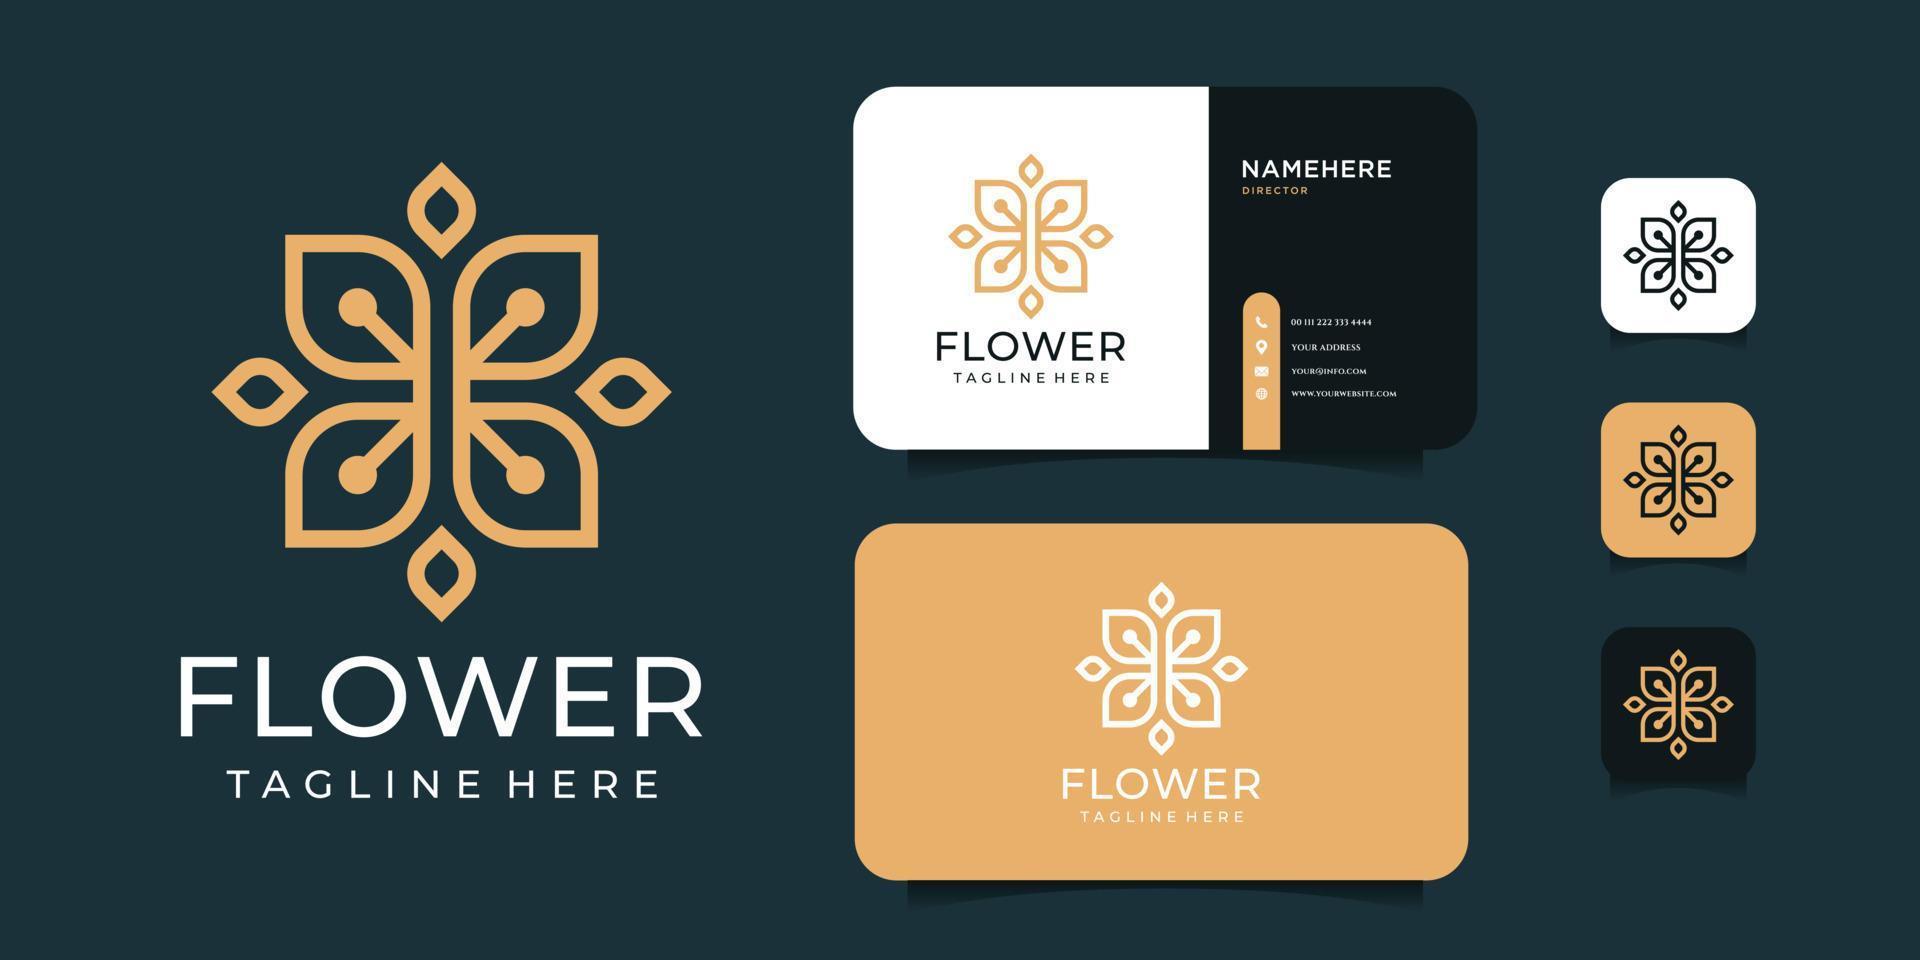 Luxury spa flower logo design vector with gold concept